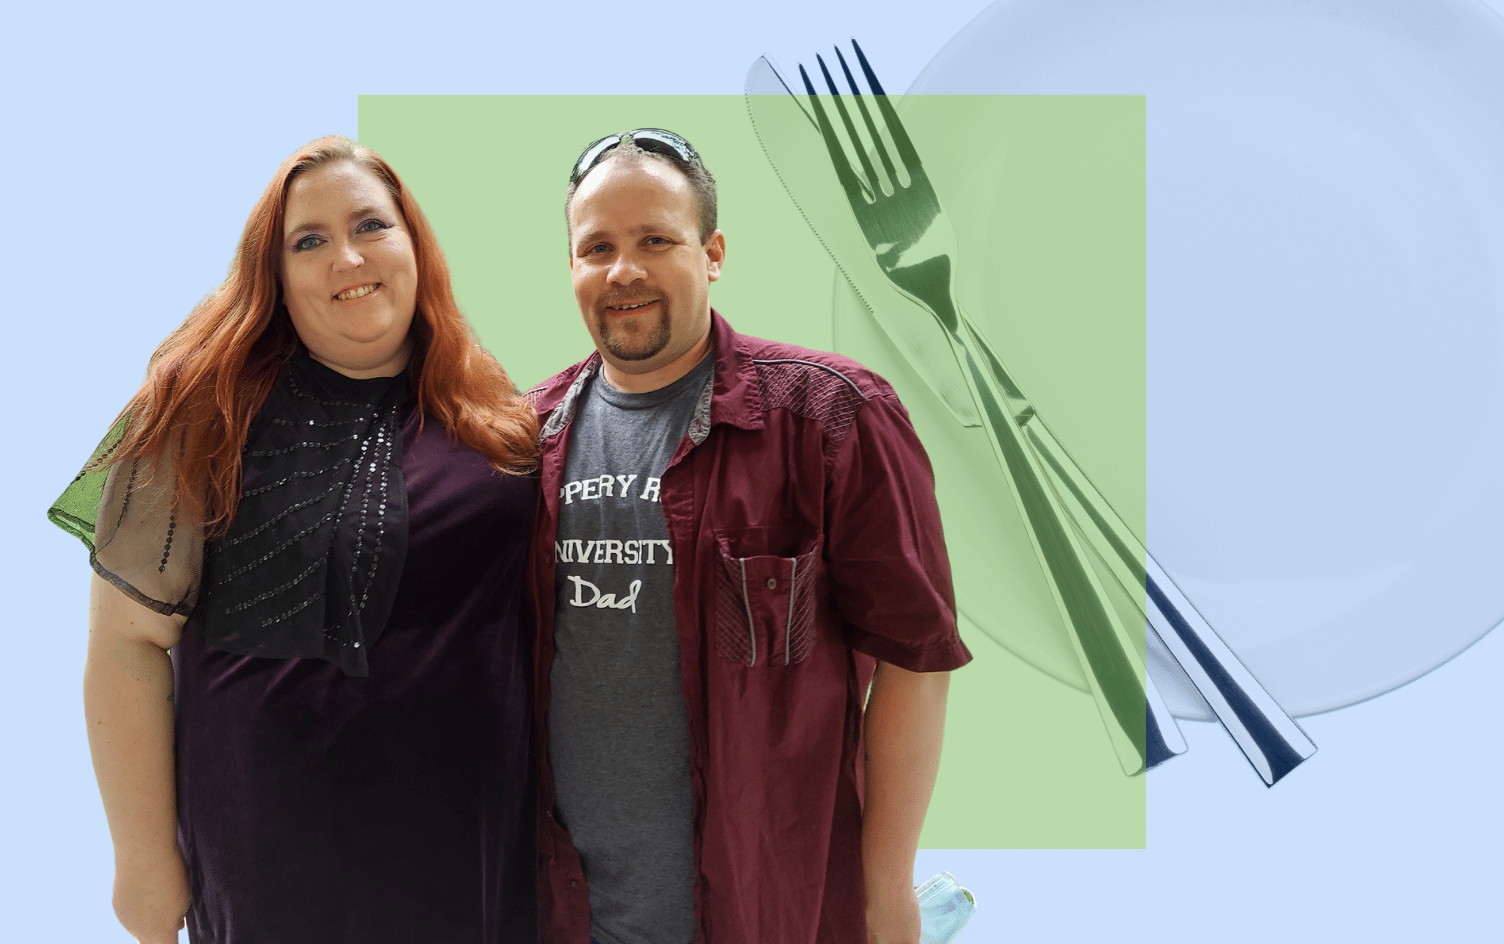 Can Couples Lose Weight Together? Read Katie and Matt's Inspiring Story | MyFitnessPal